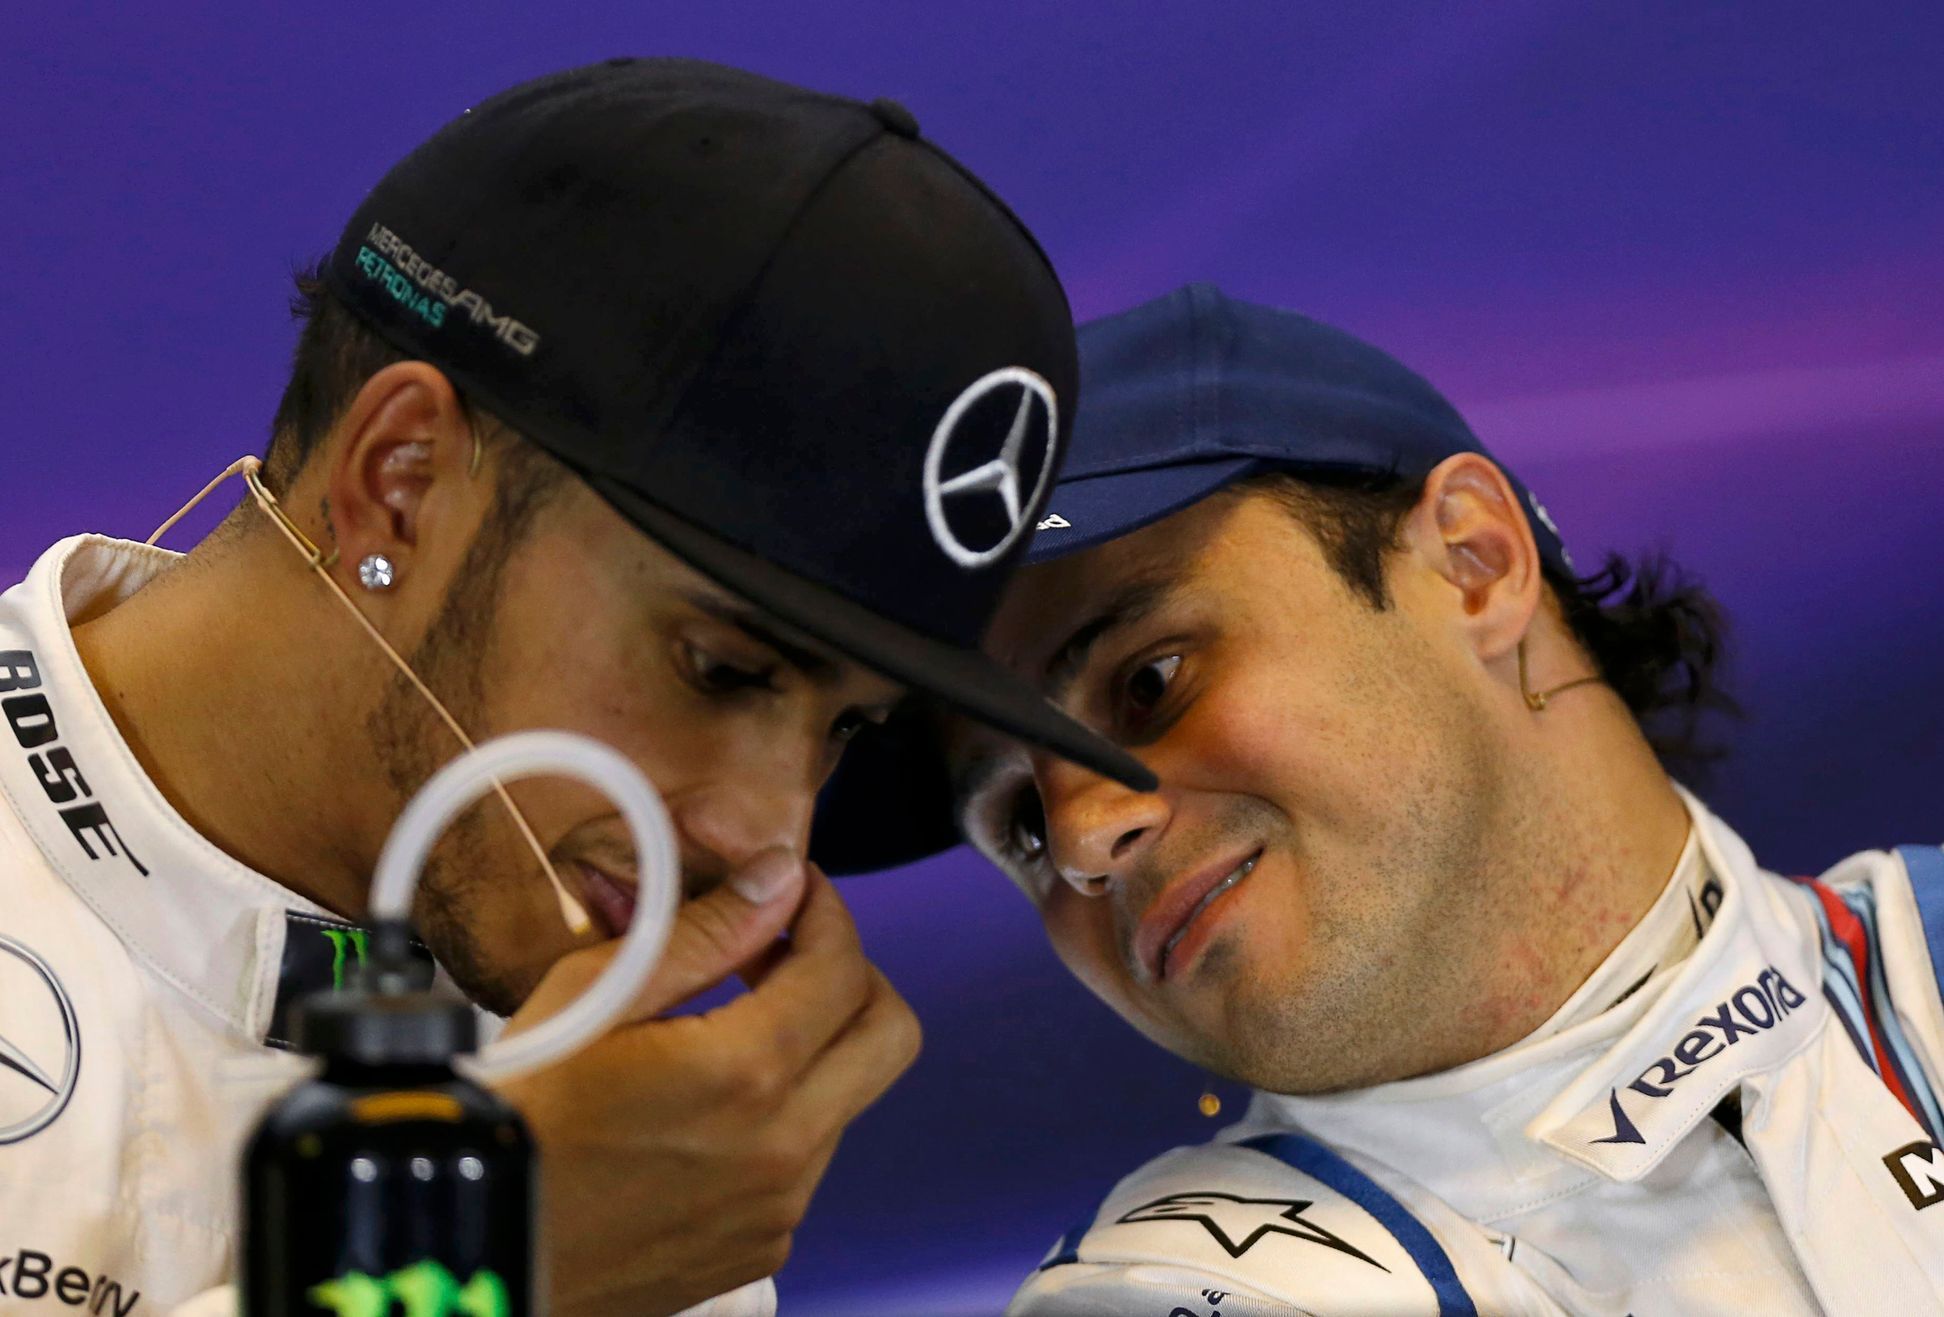 Mercedes Formula One driver Nico Rosberg of Germany speaks with team mate Lewis Hamilton of Britain during a news conference following the qualifying session of the Australian F1 Grand Prix at the Alb